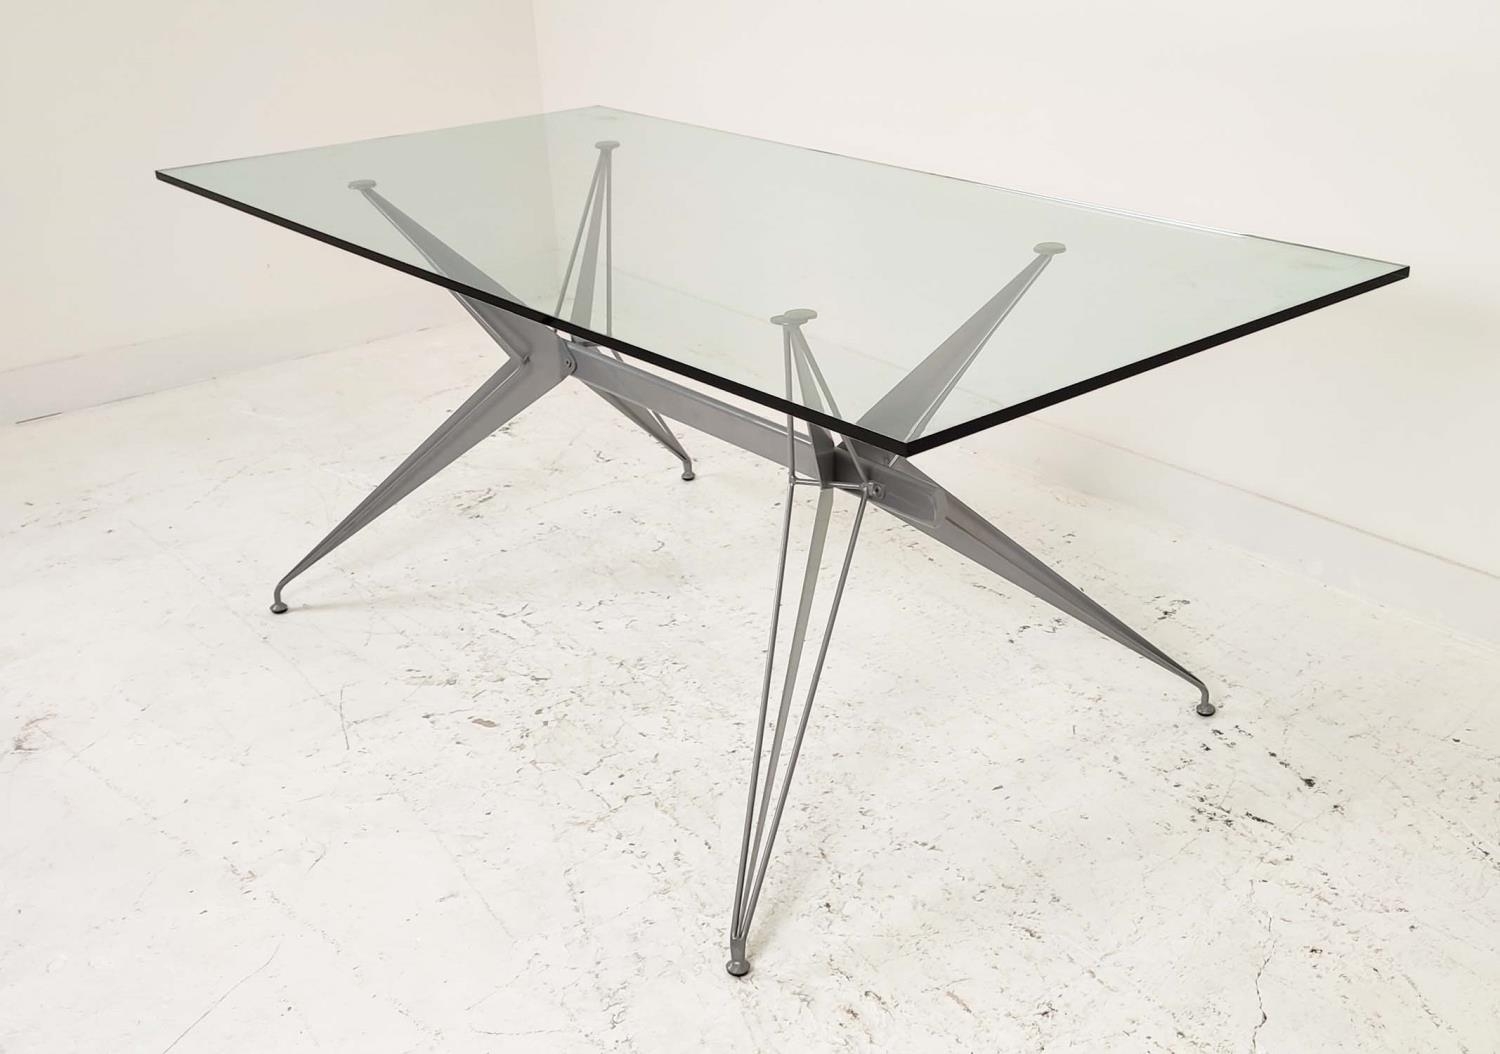 ATRIBUTED TO FASEM DINING TABLE, by Studio Archirivolto, glass top on metal base, 180cm x 85cm x - Image 3 of 8